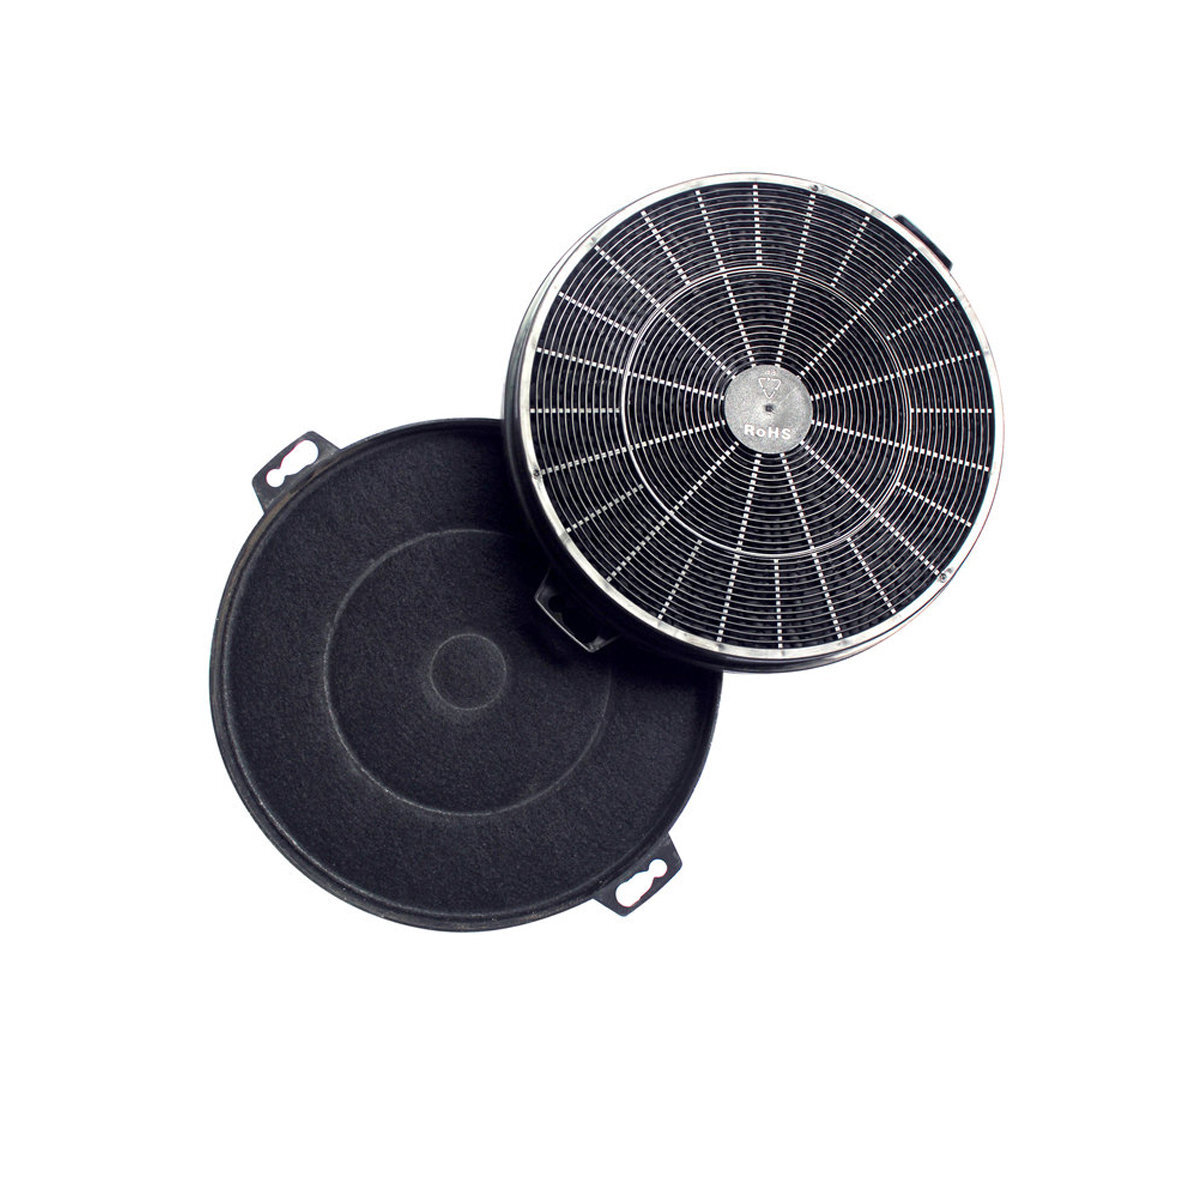 Activated Carbon Range Hood Filter Replacement for Bora Basic